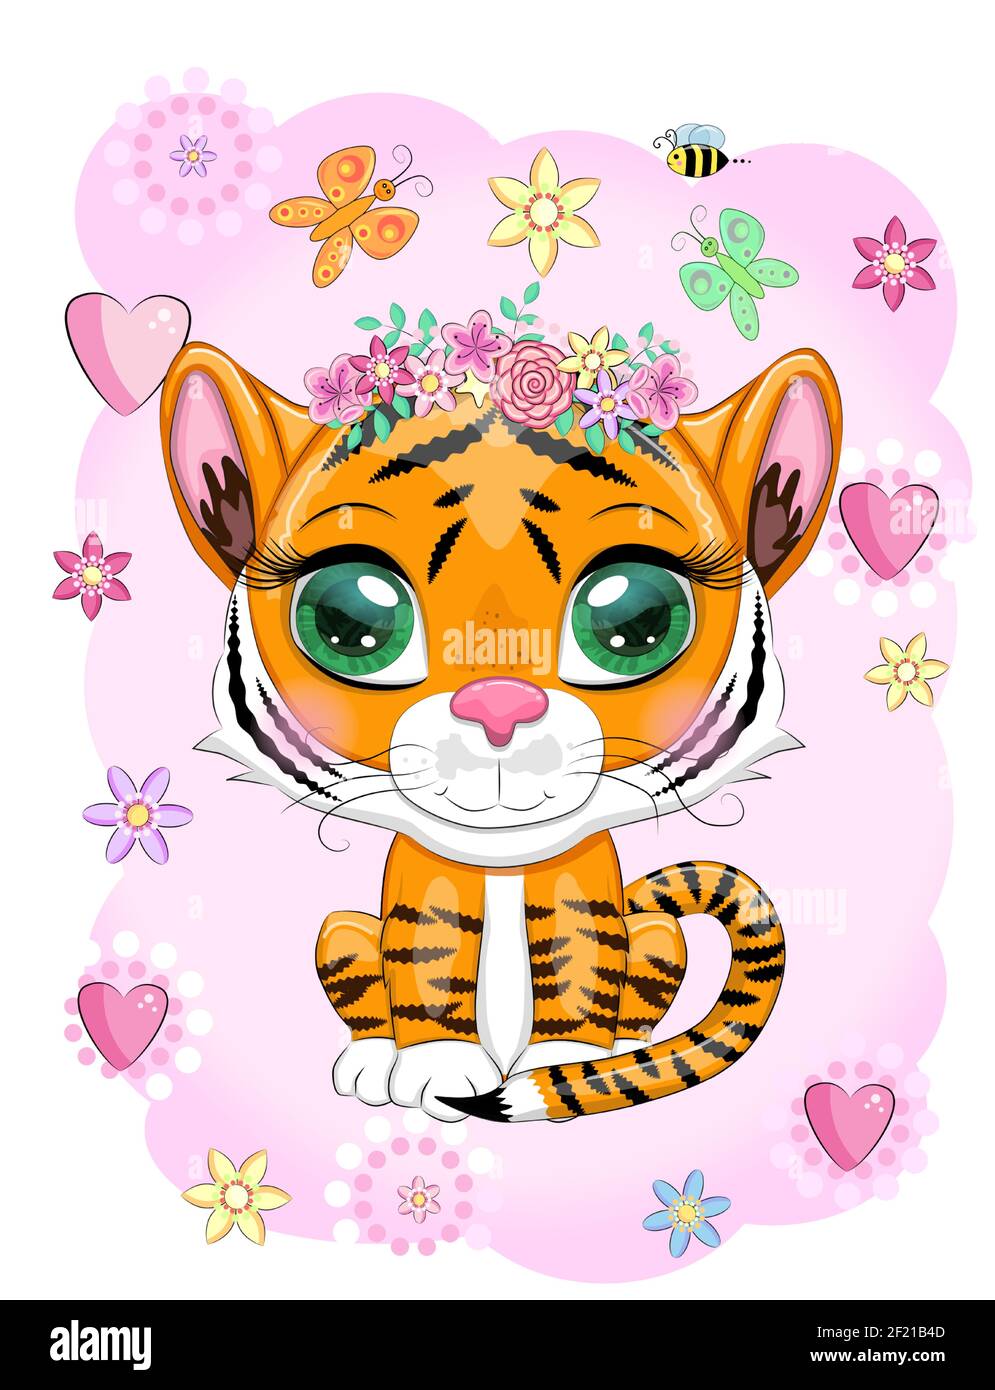 Color background with cute kawaii animal tiger Vector Image